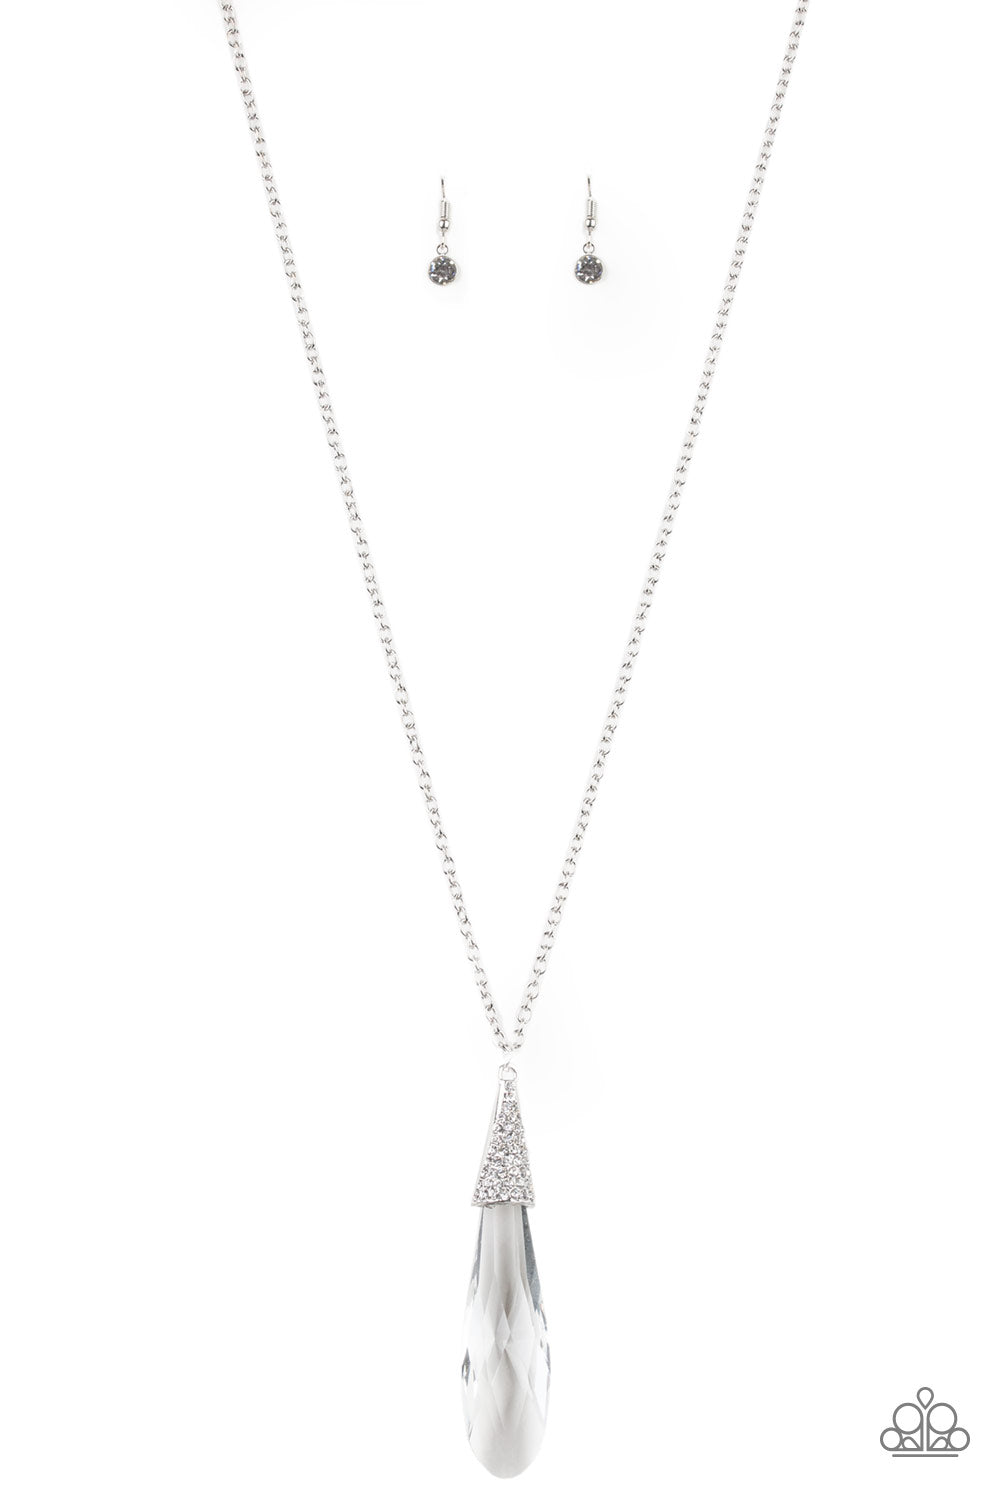 Paparazzi Jaw-Droppingly Jealous - White Teardrop Necklace - A Finishing Touch 